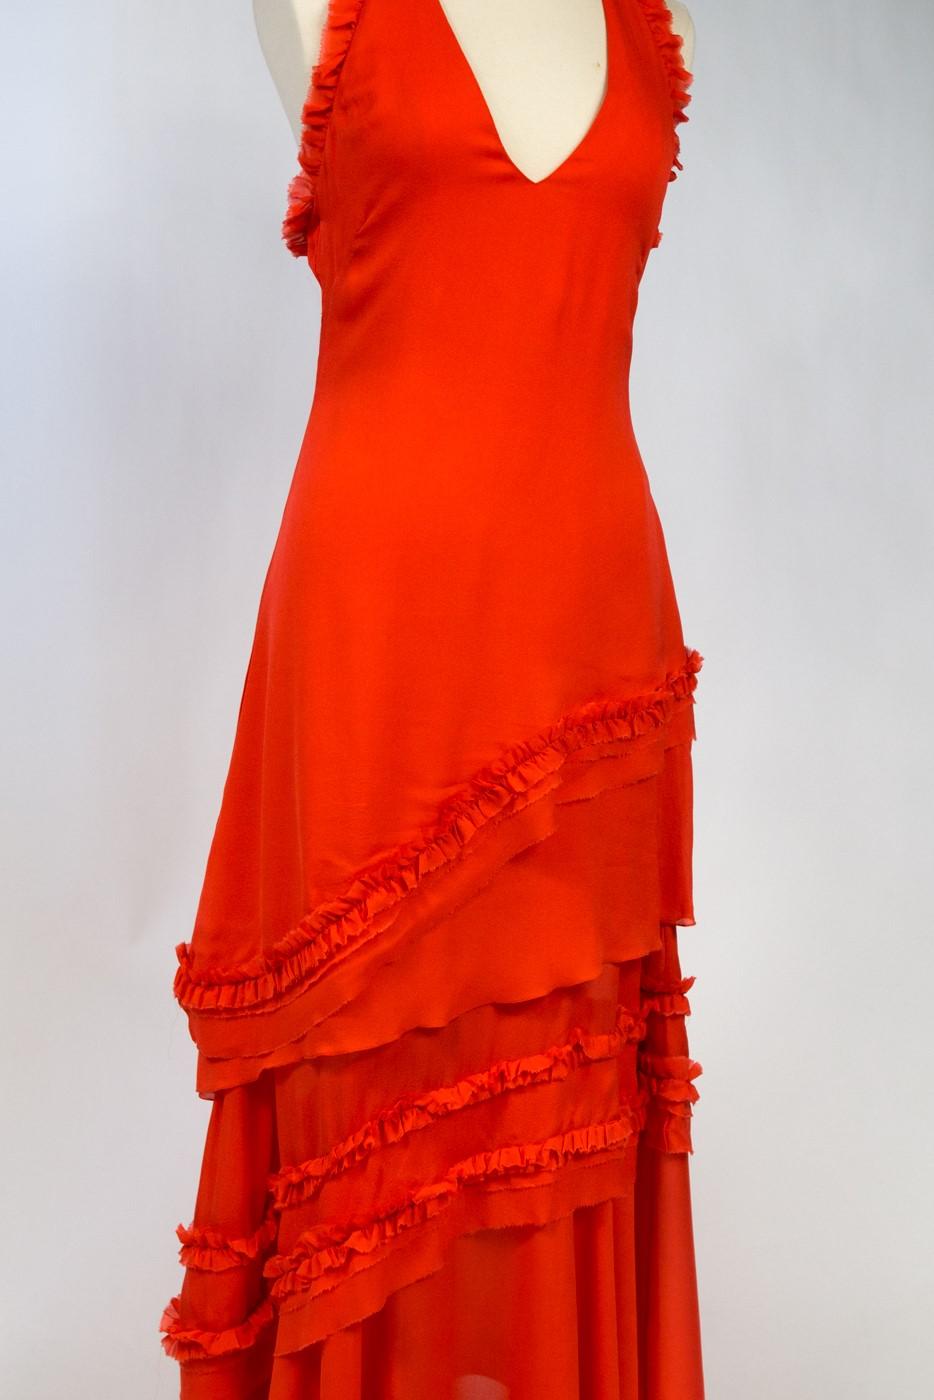 Circa 1997/2002

France

Beautiful evening dress by Thierry Mugler Haute Couture model 1P 2730 dating from the 2000s. Long dress in coral silk crepe, bare back and plunging V-neckline buttoned behind the neck. Fitted sheath dress with two large